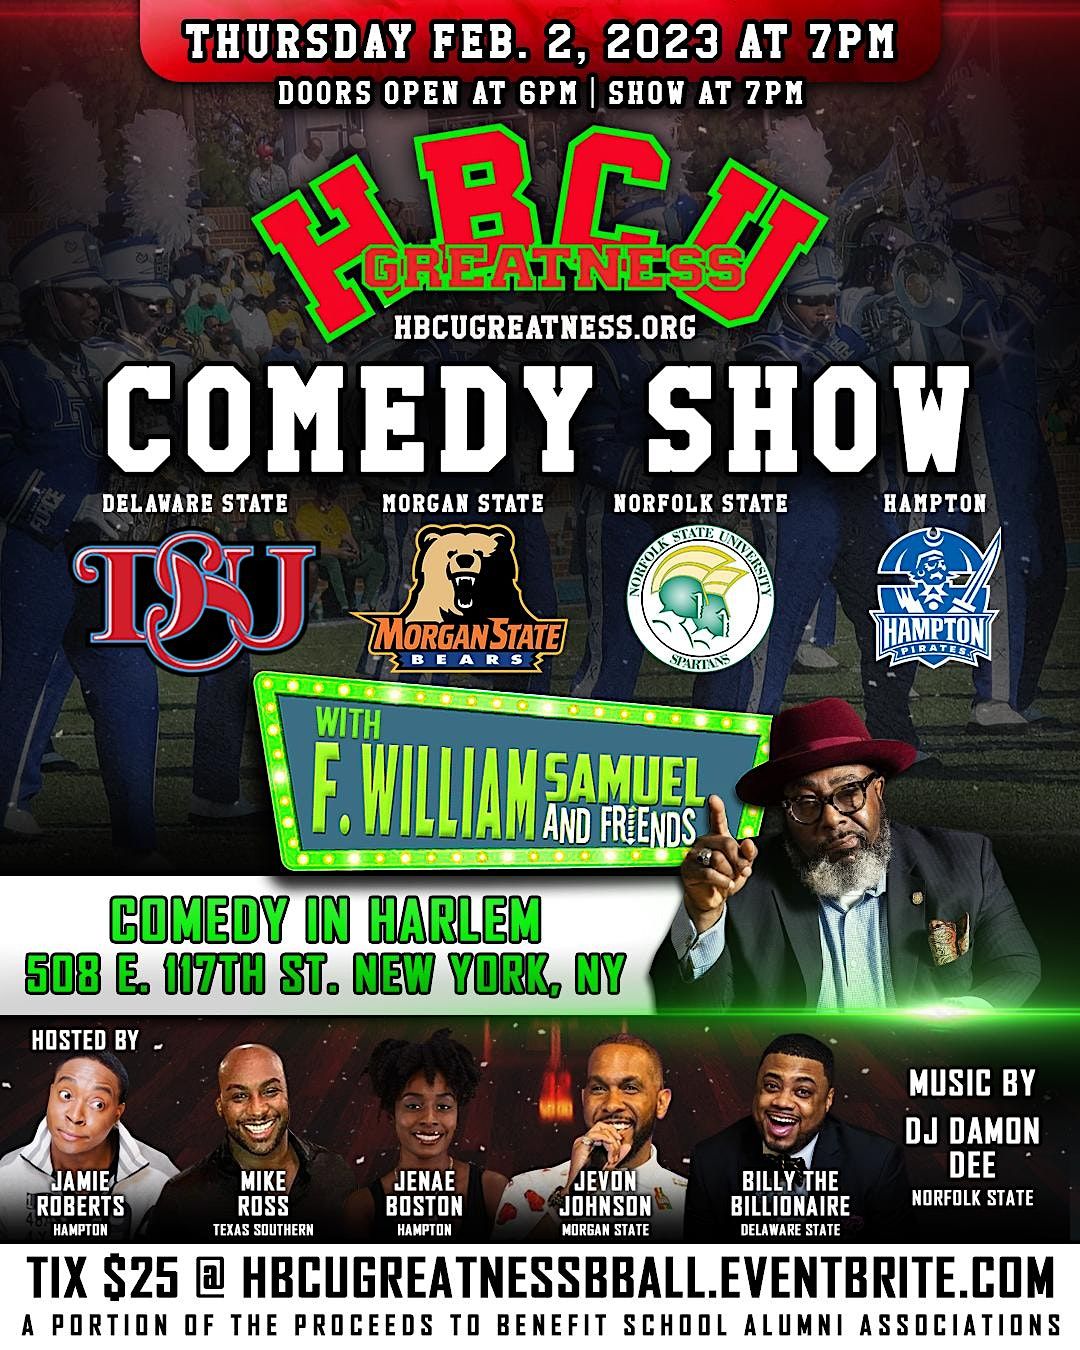 HBCU Greatness Basketball Classic Weekend-COMEDY SHOW, Comedy in Harlem ...